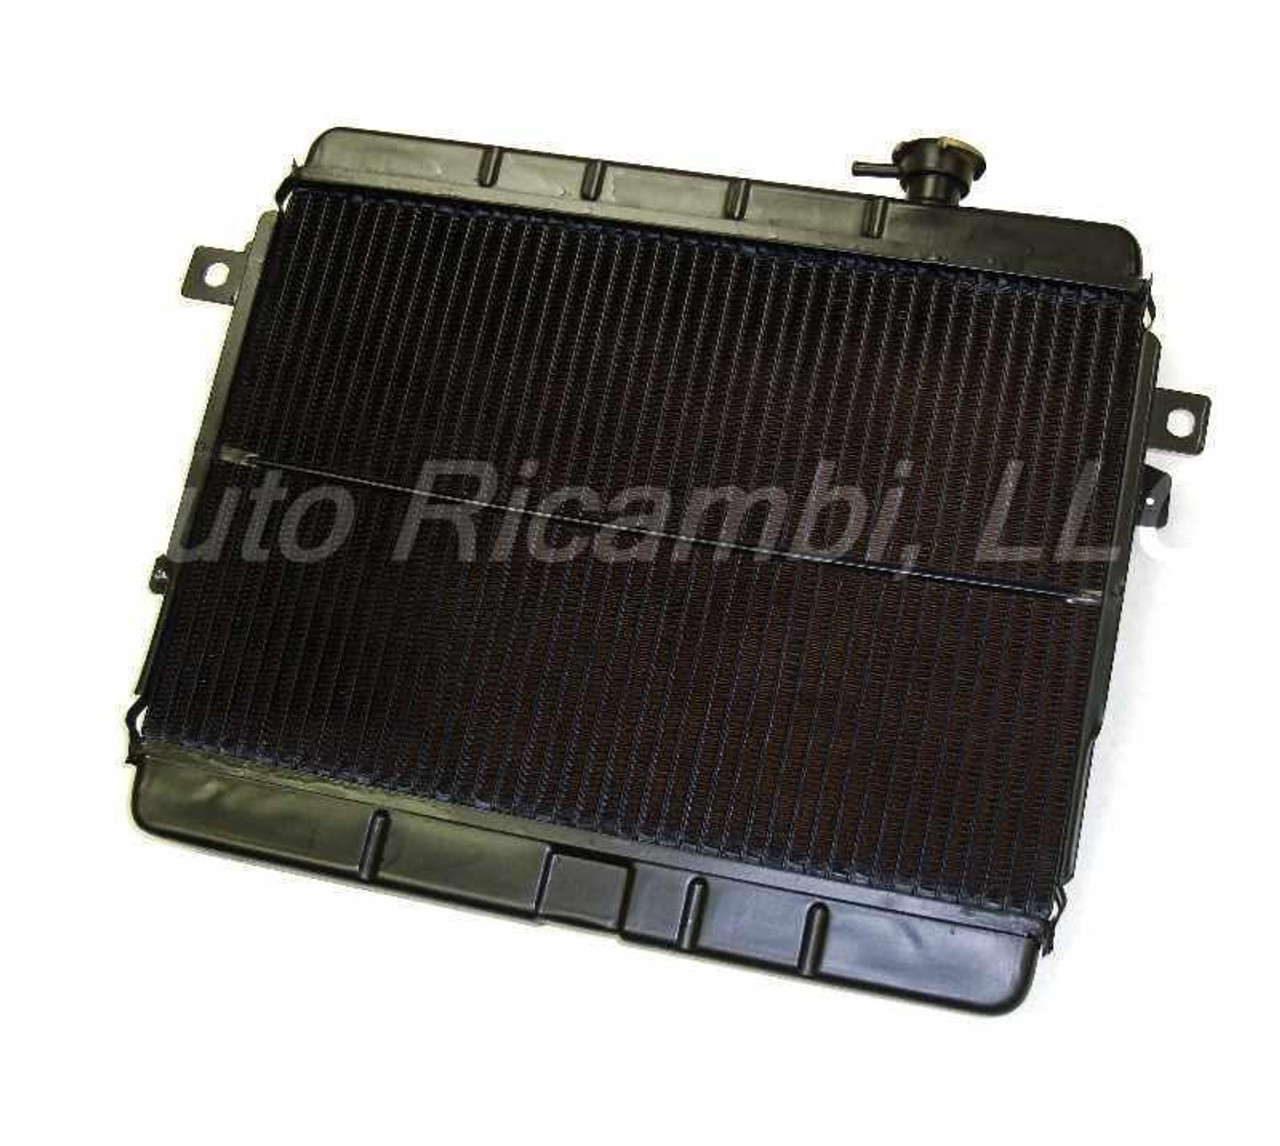 New copper core radiator
FIAT Spider 2000 and Pininfarina - 1980-1985 with Bosch fuel injection and manual transmission (1995cc)
- CO1-422, 5973613, 4442440
 - Auto Ricambi